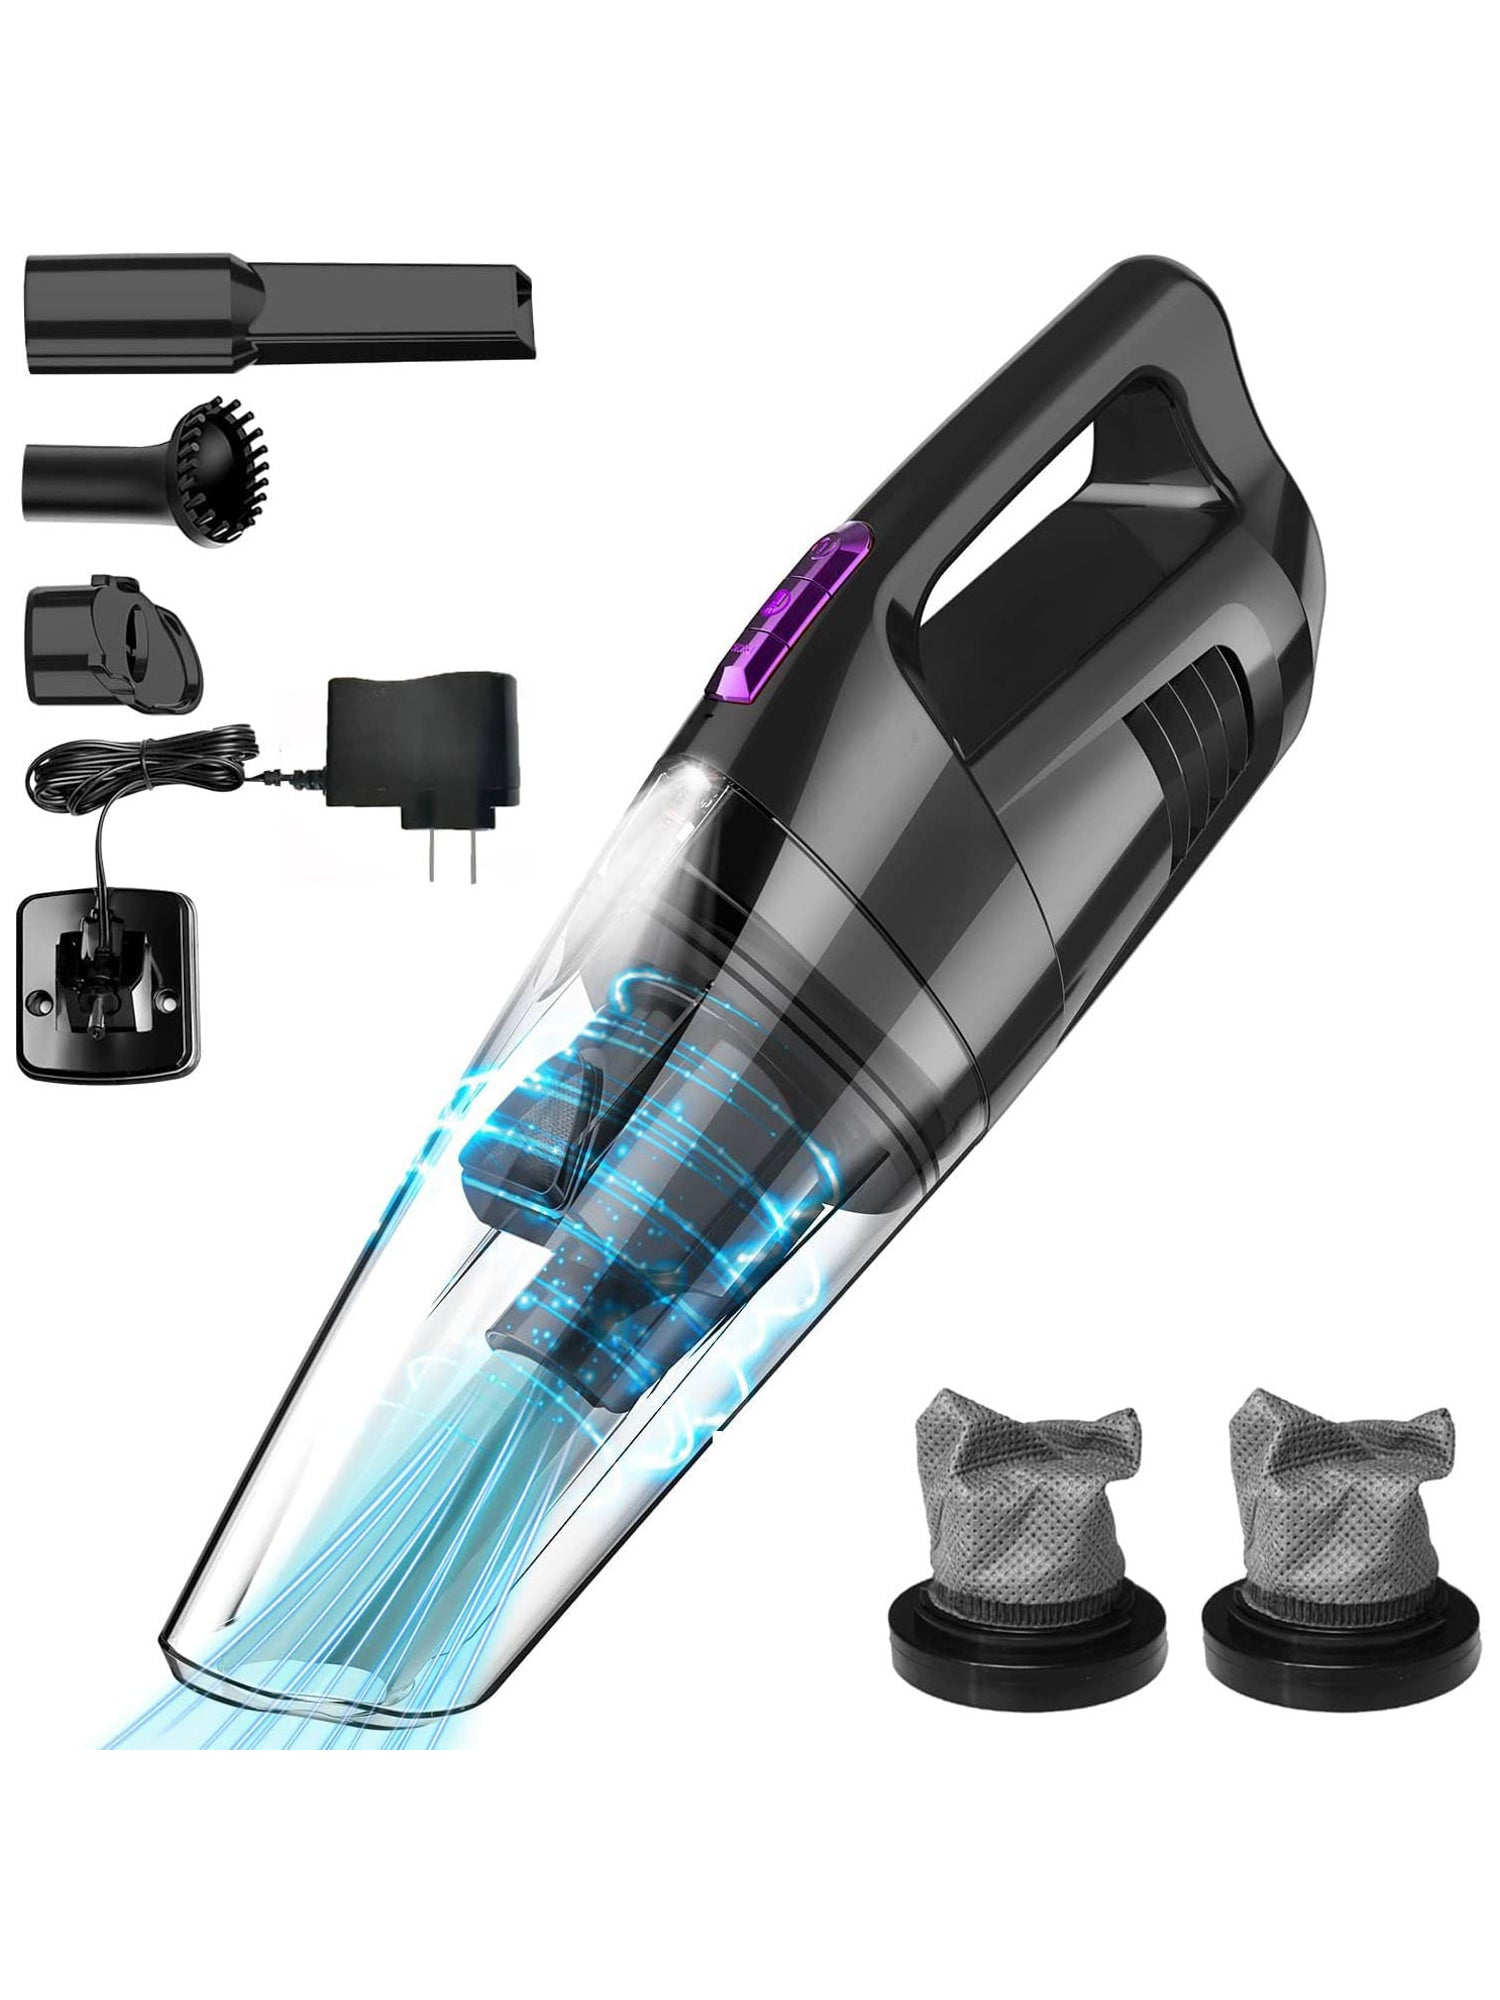 WHALL® Cordless Handheld Vacuum, Wet/Dry Cleaner with 8500PA Suction, LED Light, Lightweight/Portable